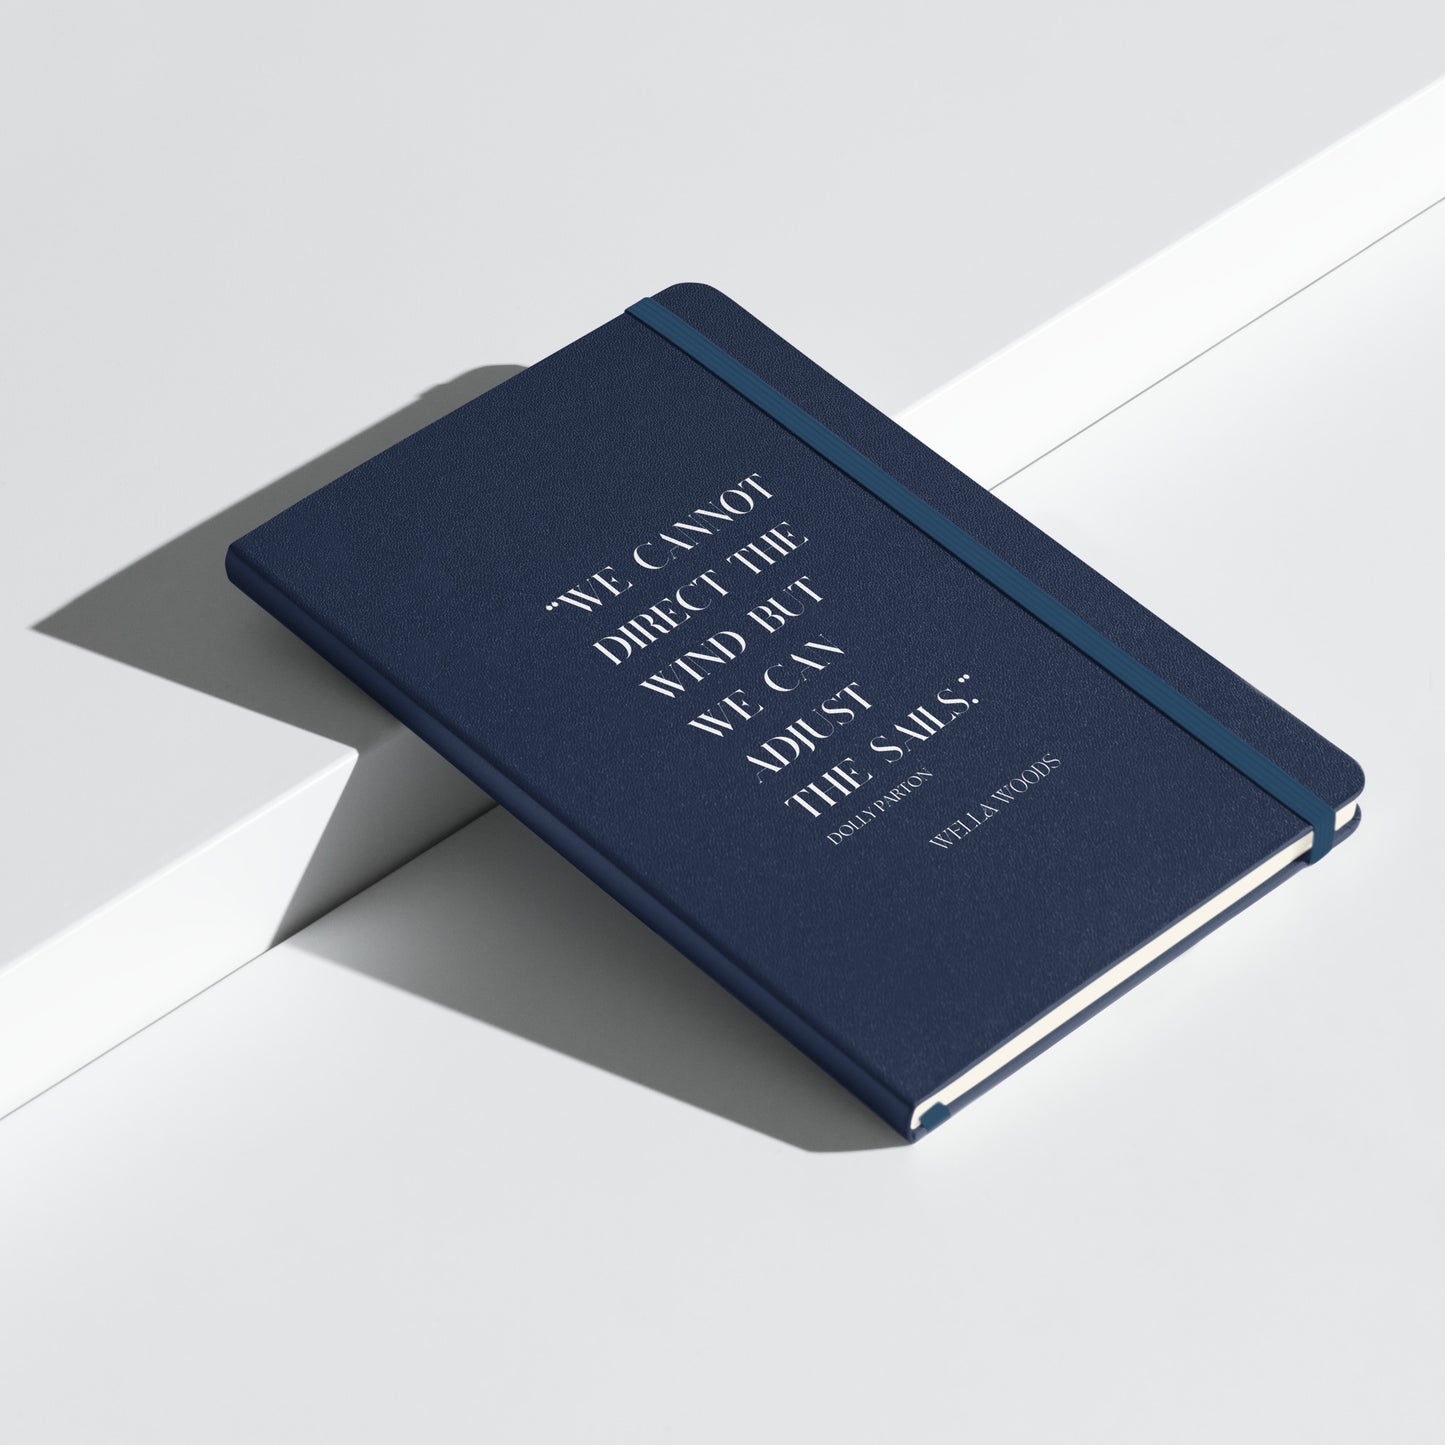 Dolly Parton Quote Hardcover Bound Notebook